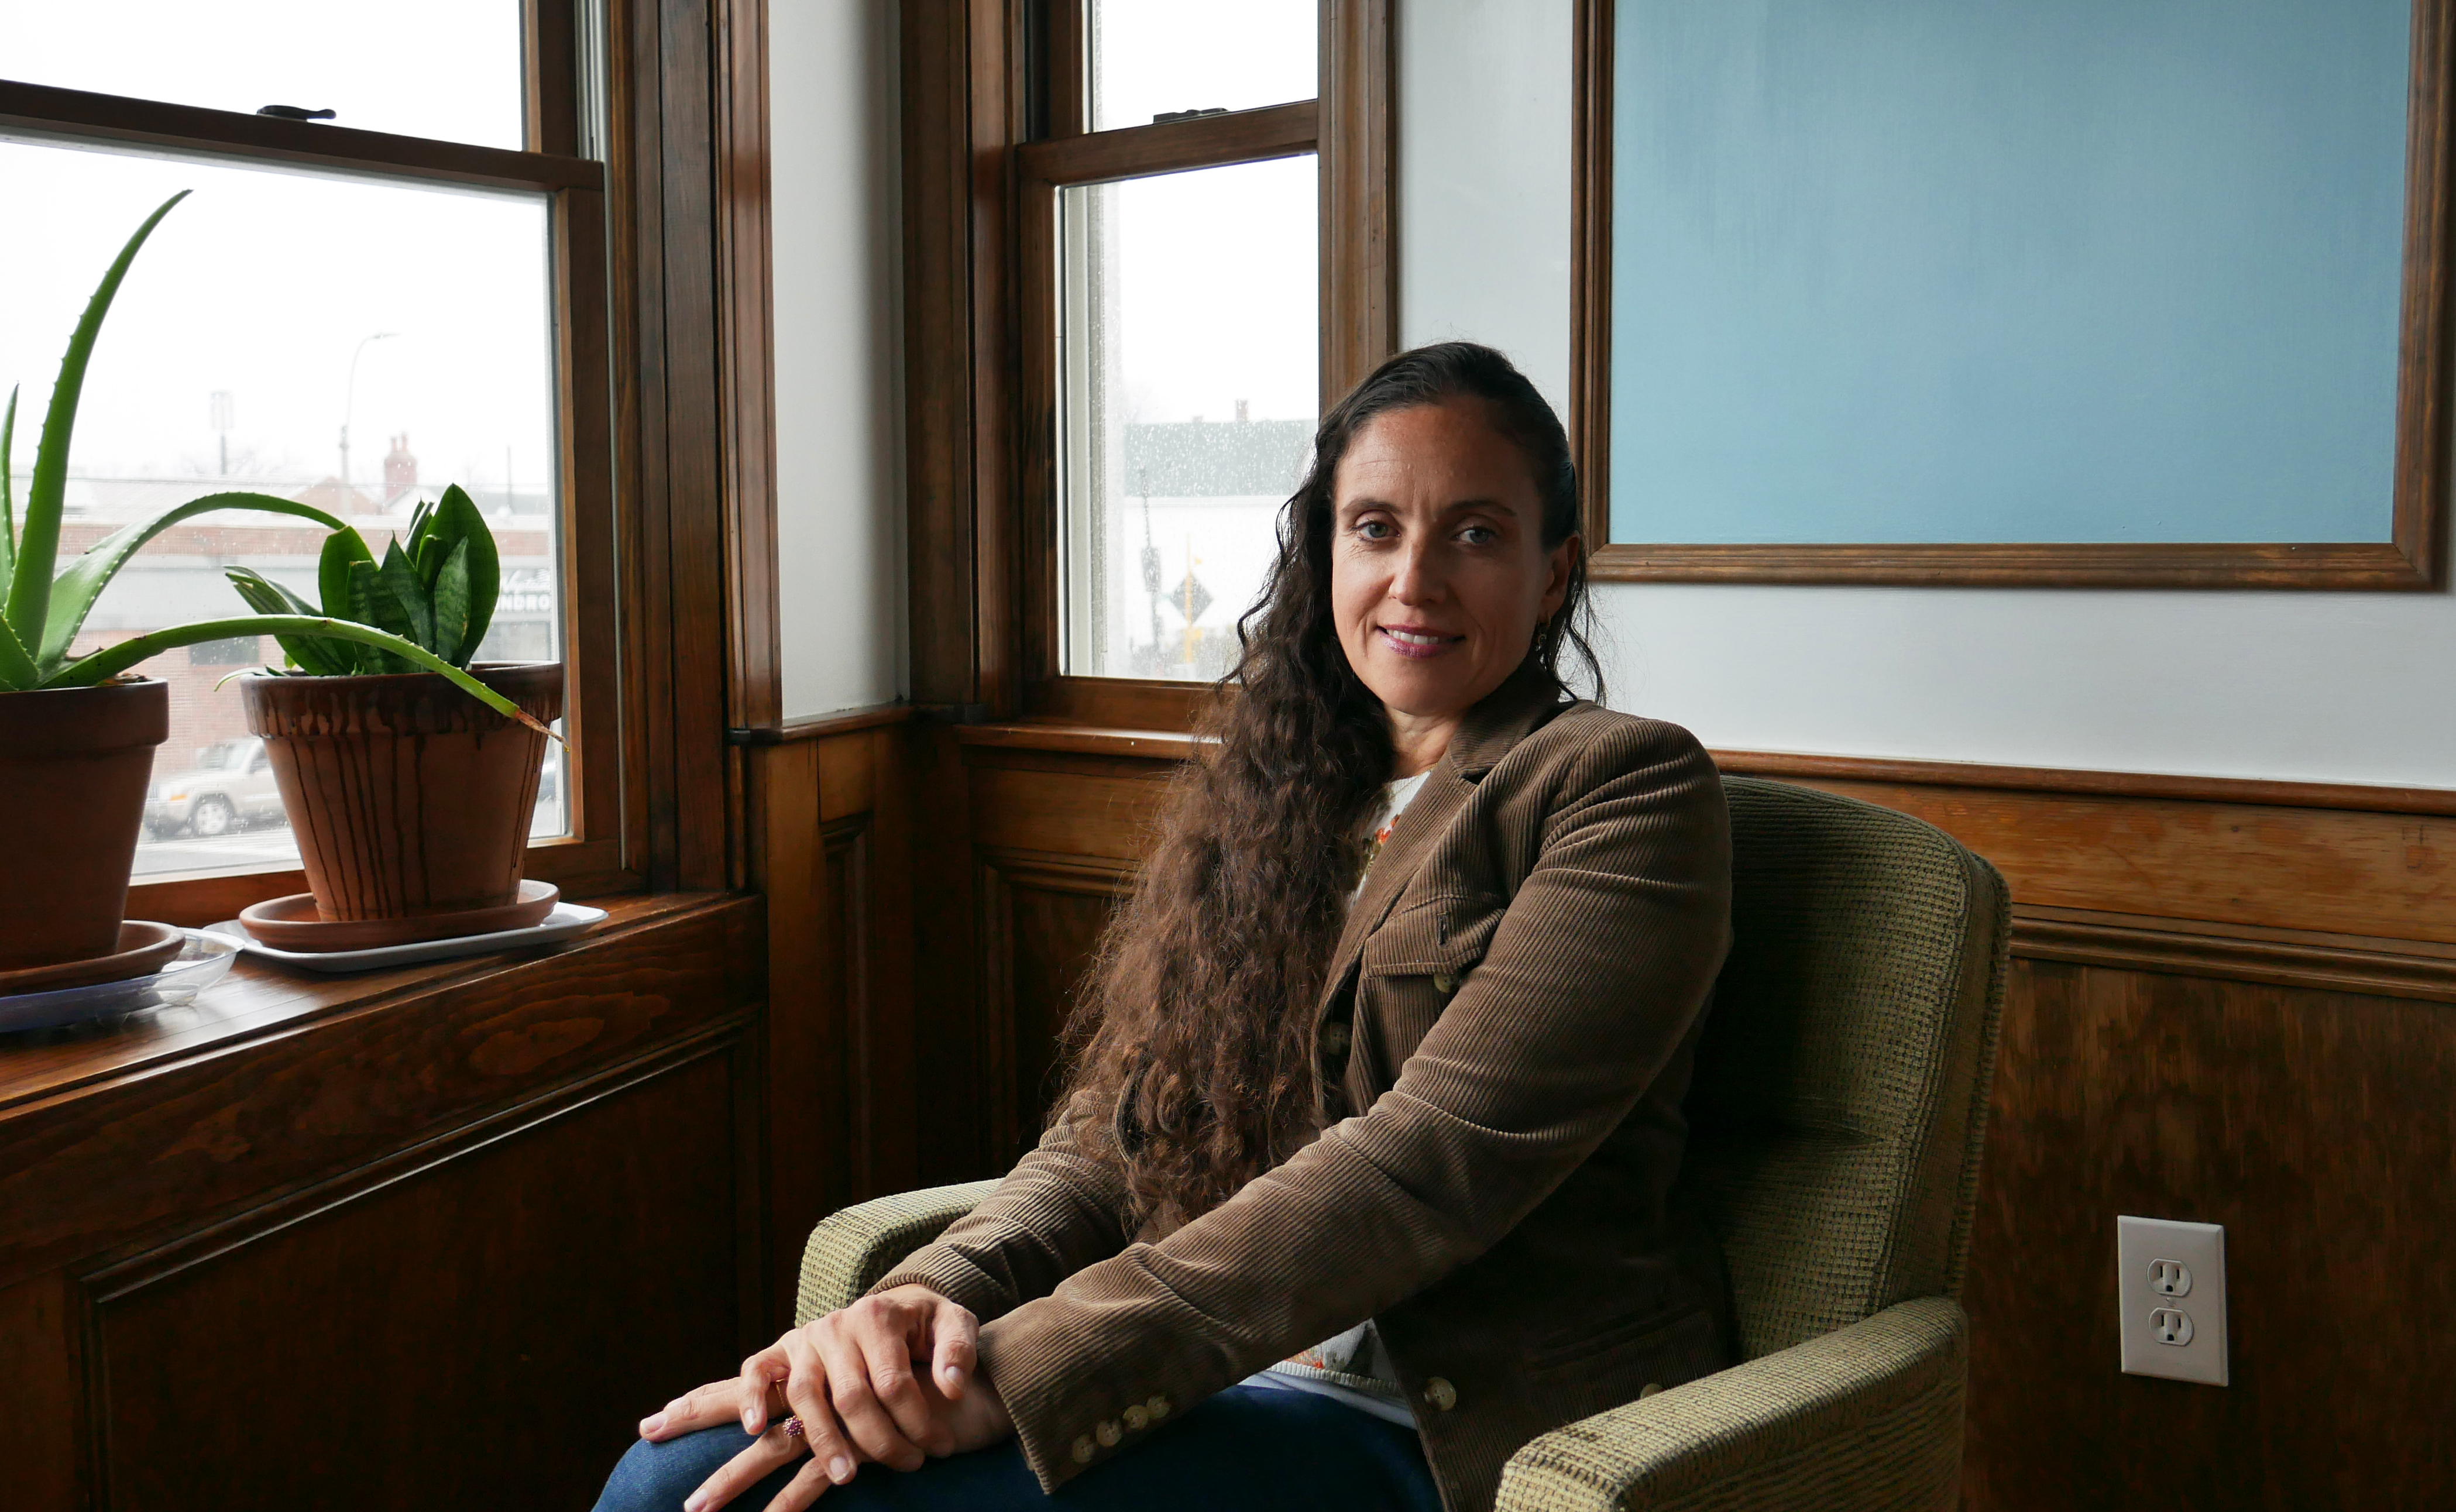 Magdalena Ayed, executive director of the Harborkeepers, sits in a conference room in her East Boston building. Photo by Jordan Erb.